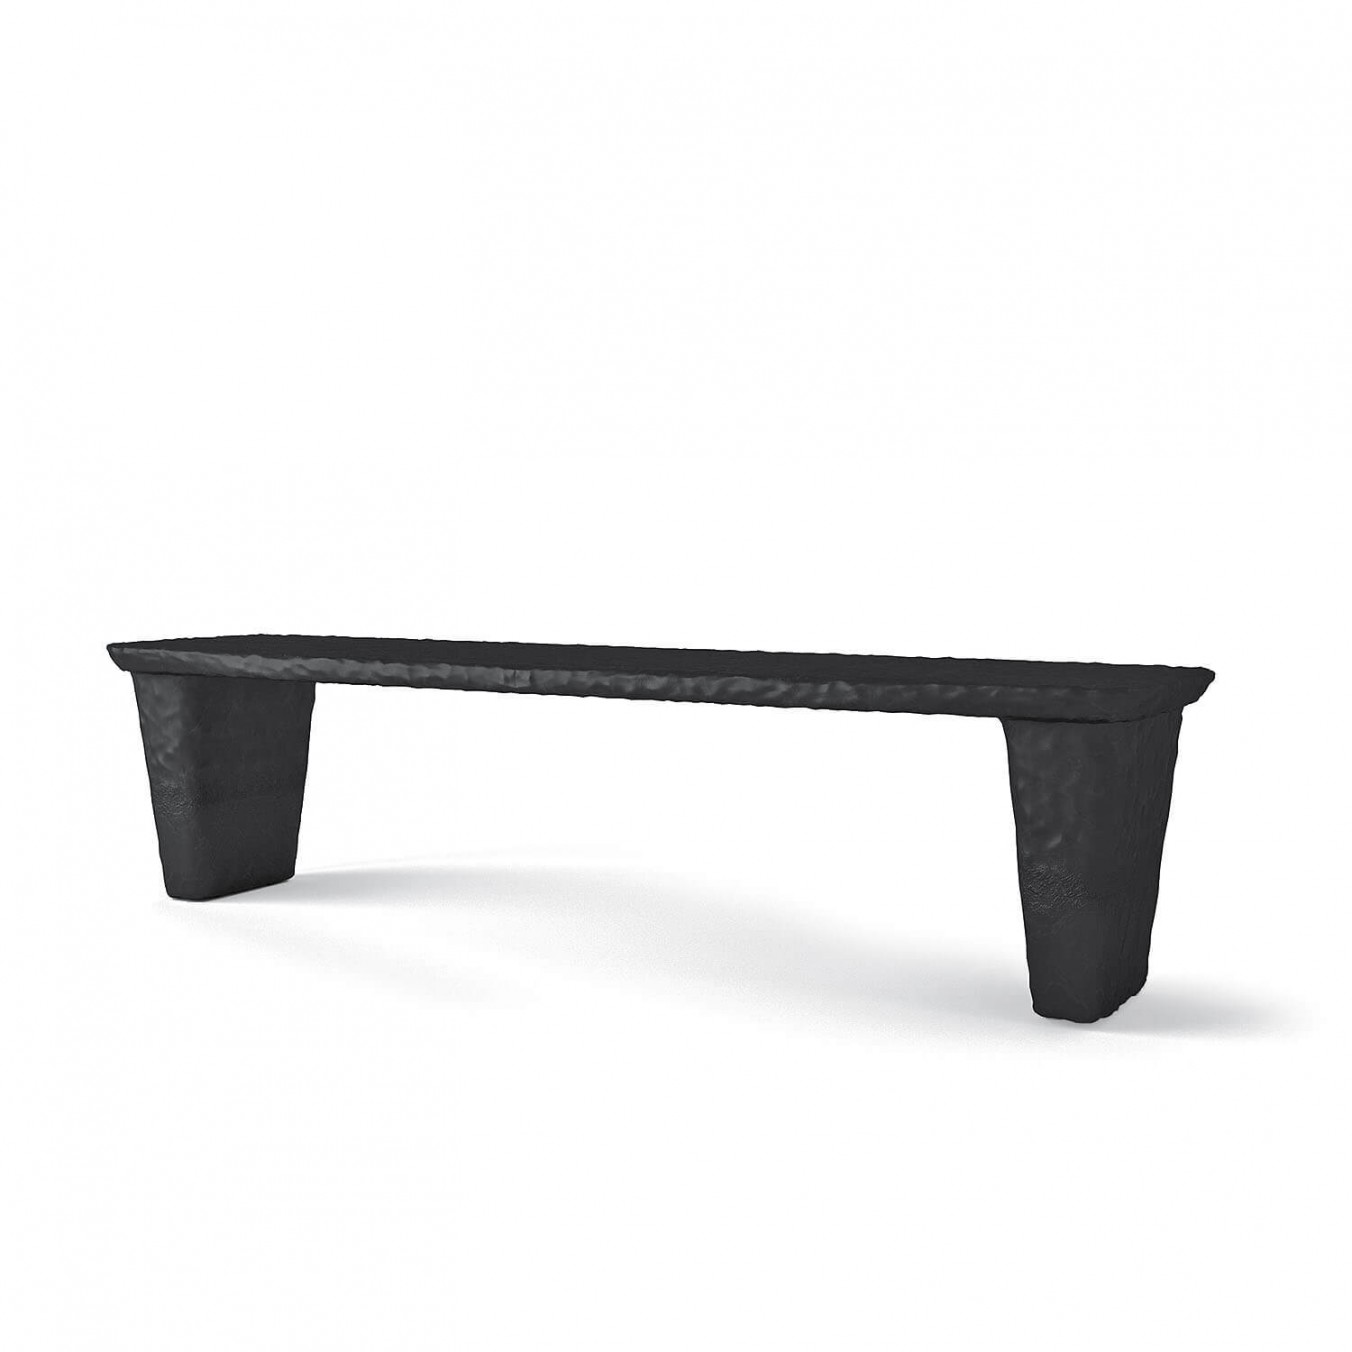 ZTISTA coffee table